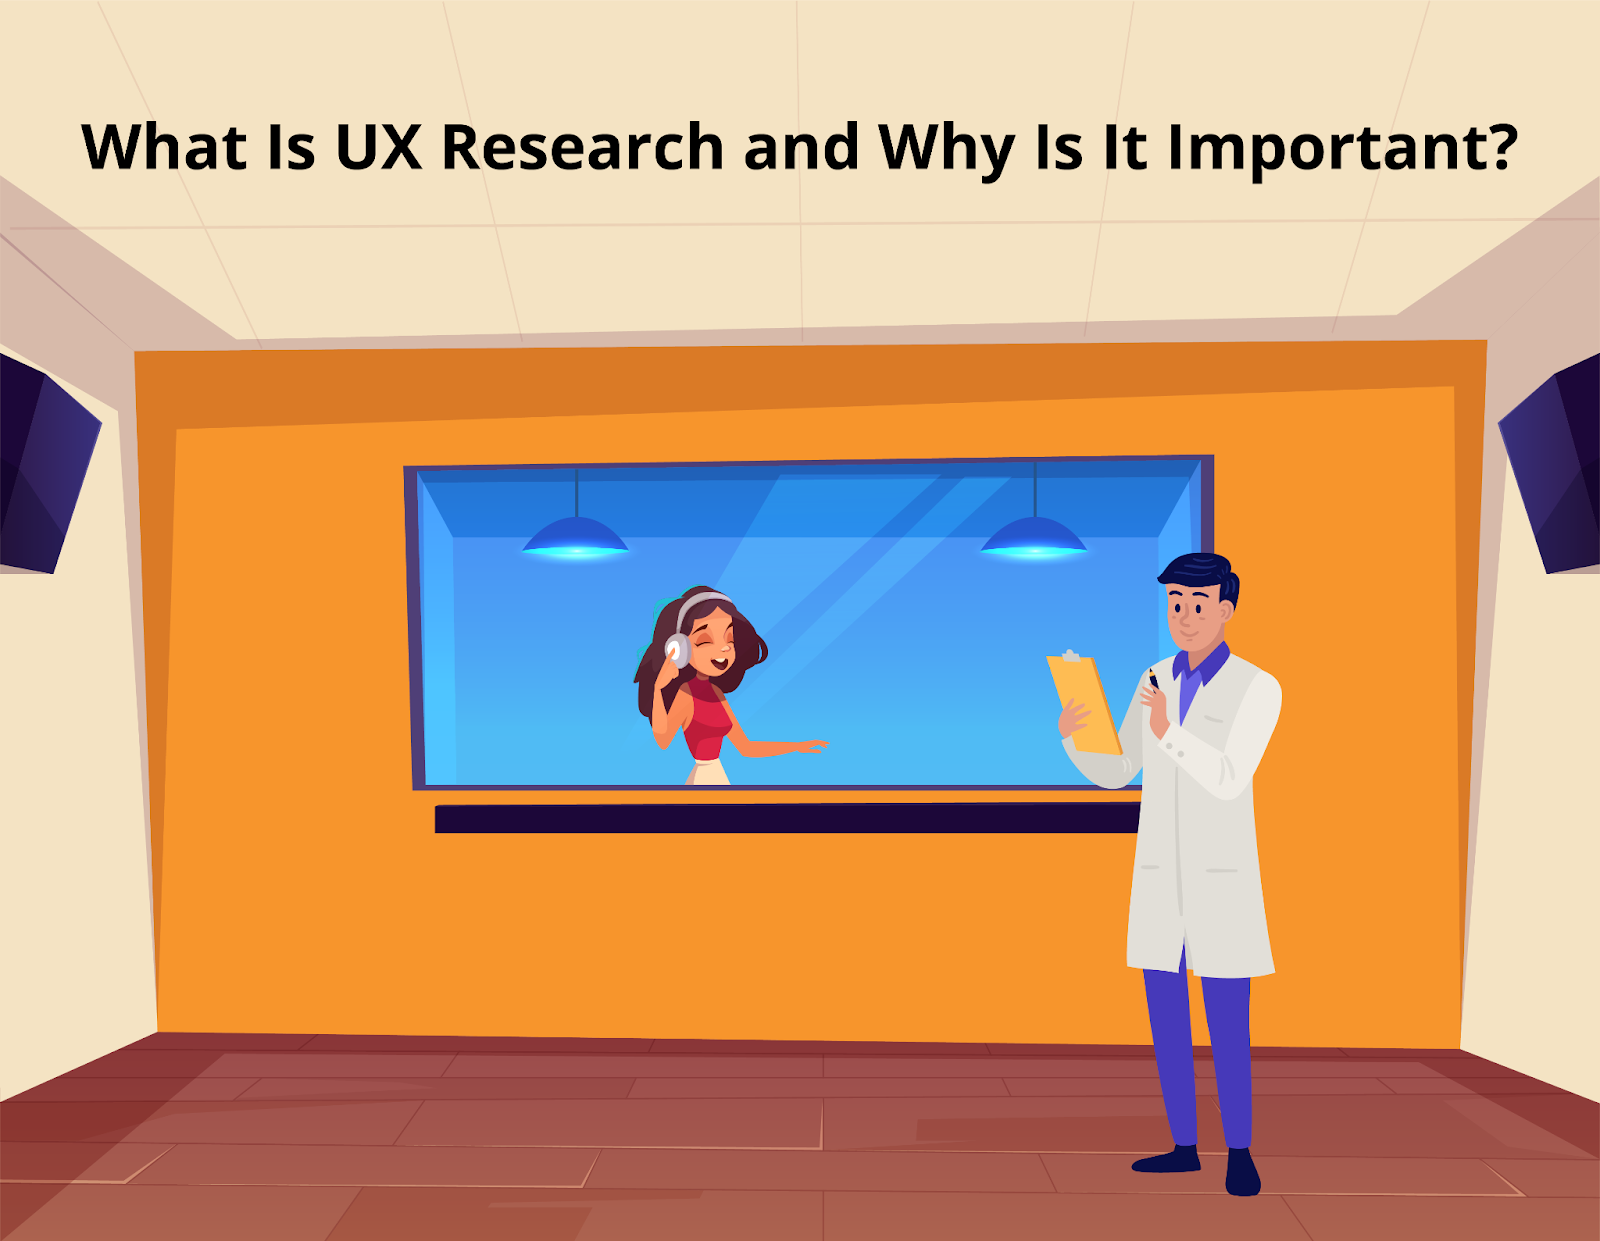 What is UX research?